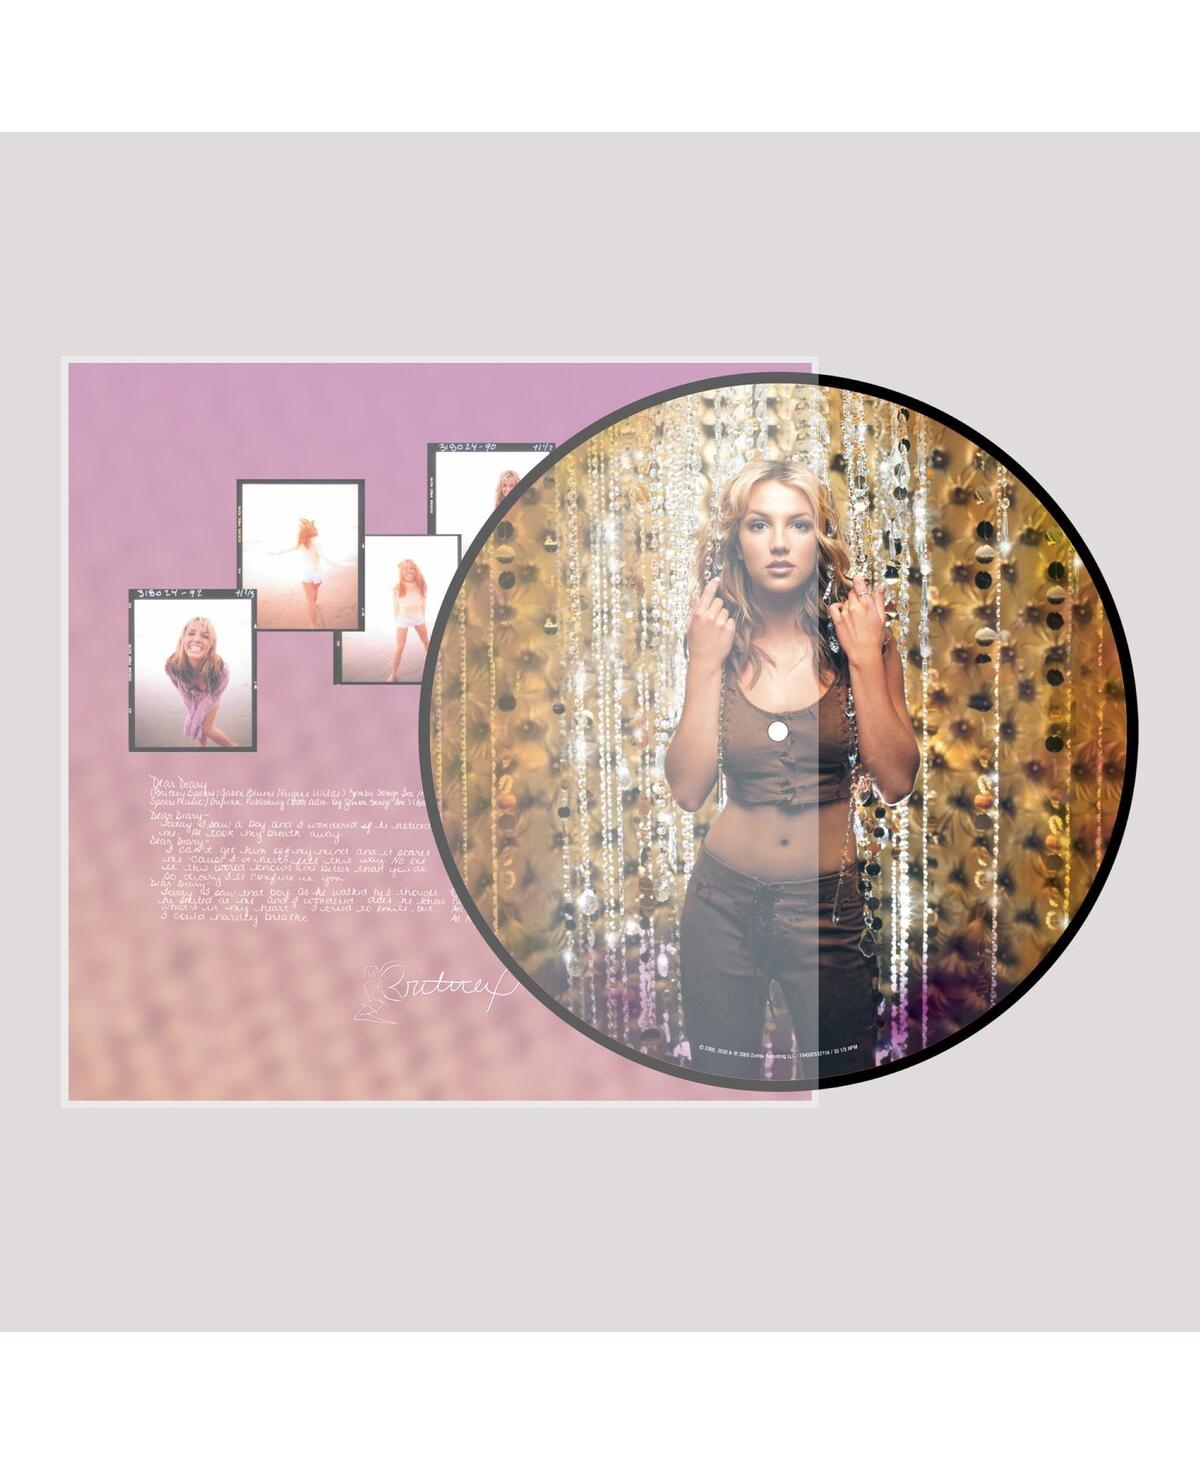 Britney Spears - Oops!... I Did It Again Picture Disc - Multi